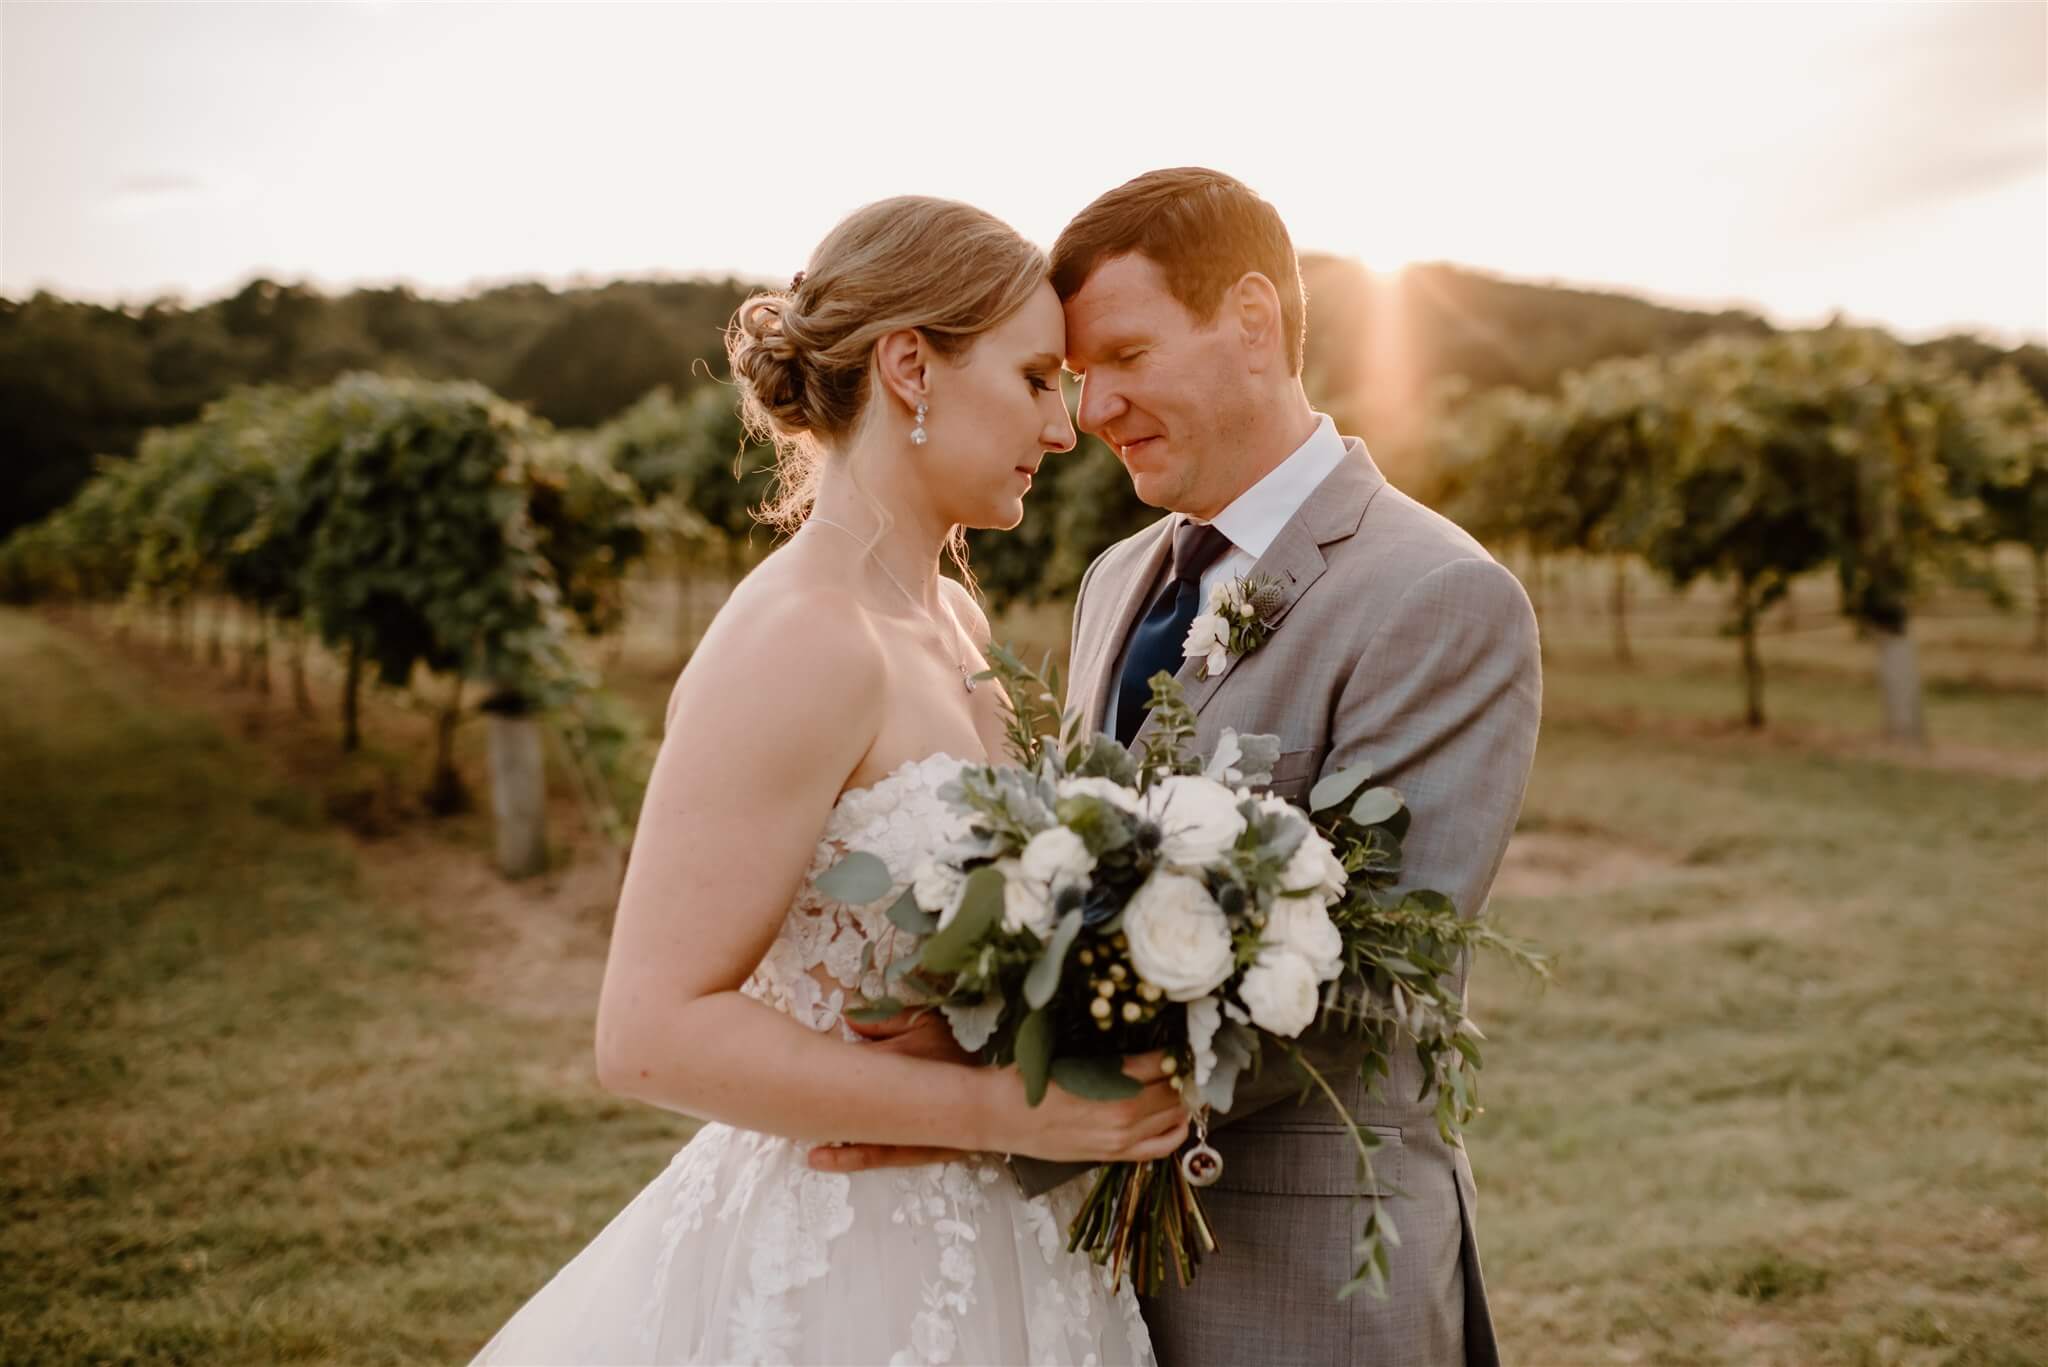 Bride and Groom at Sunset Lodge at Rusty Tractor Vineyards in Little Rock AR